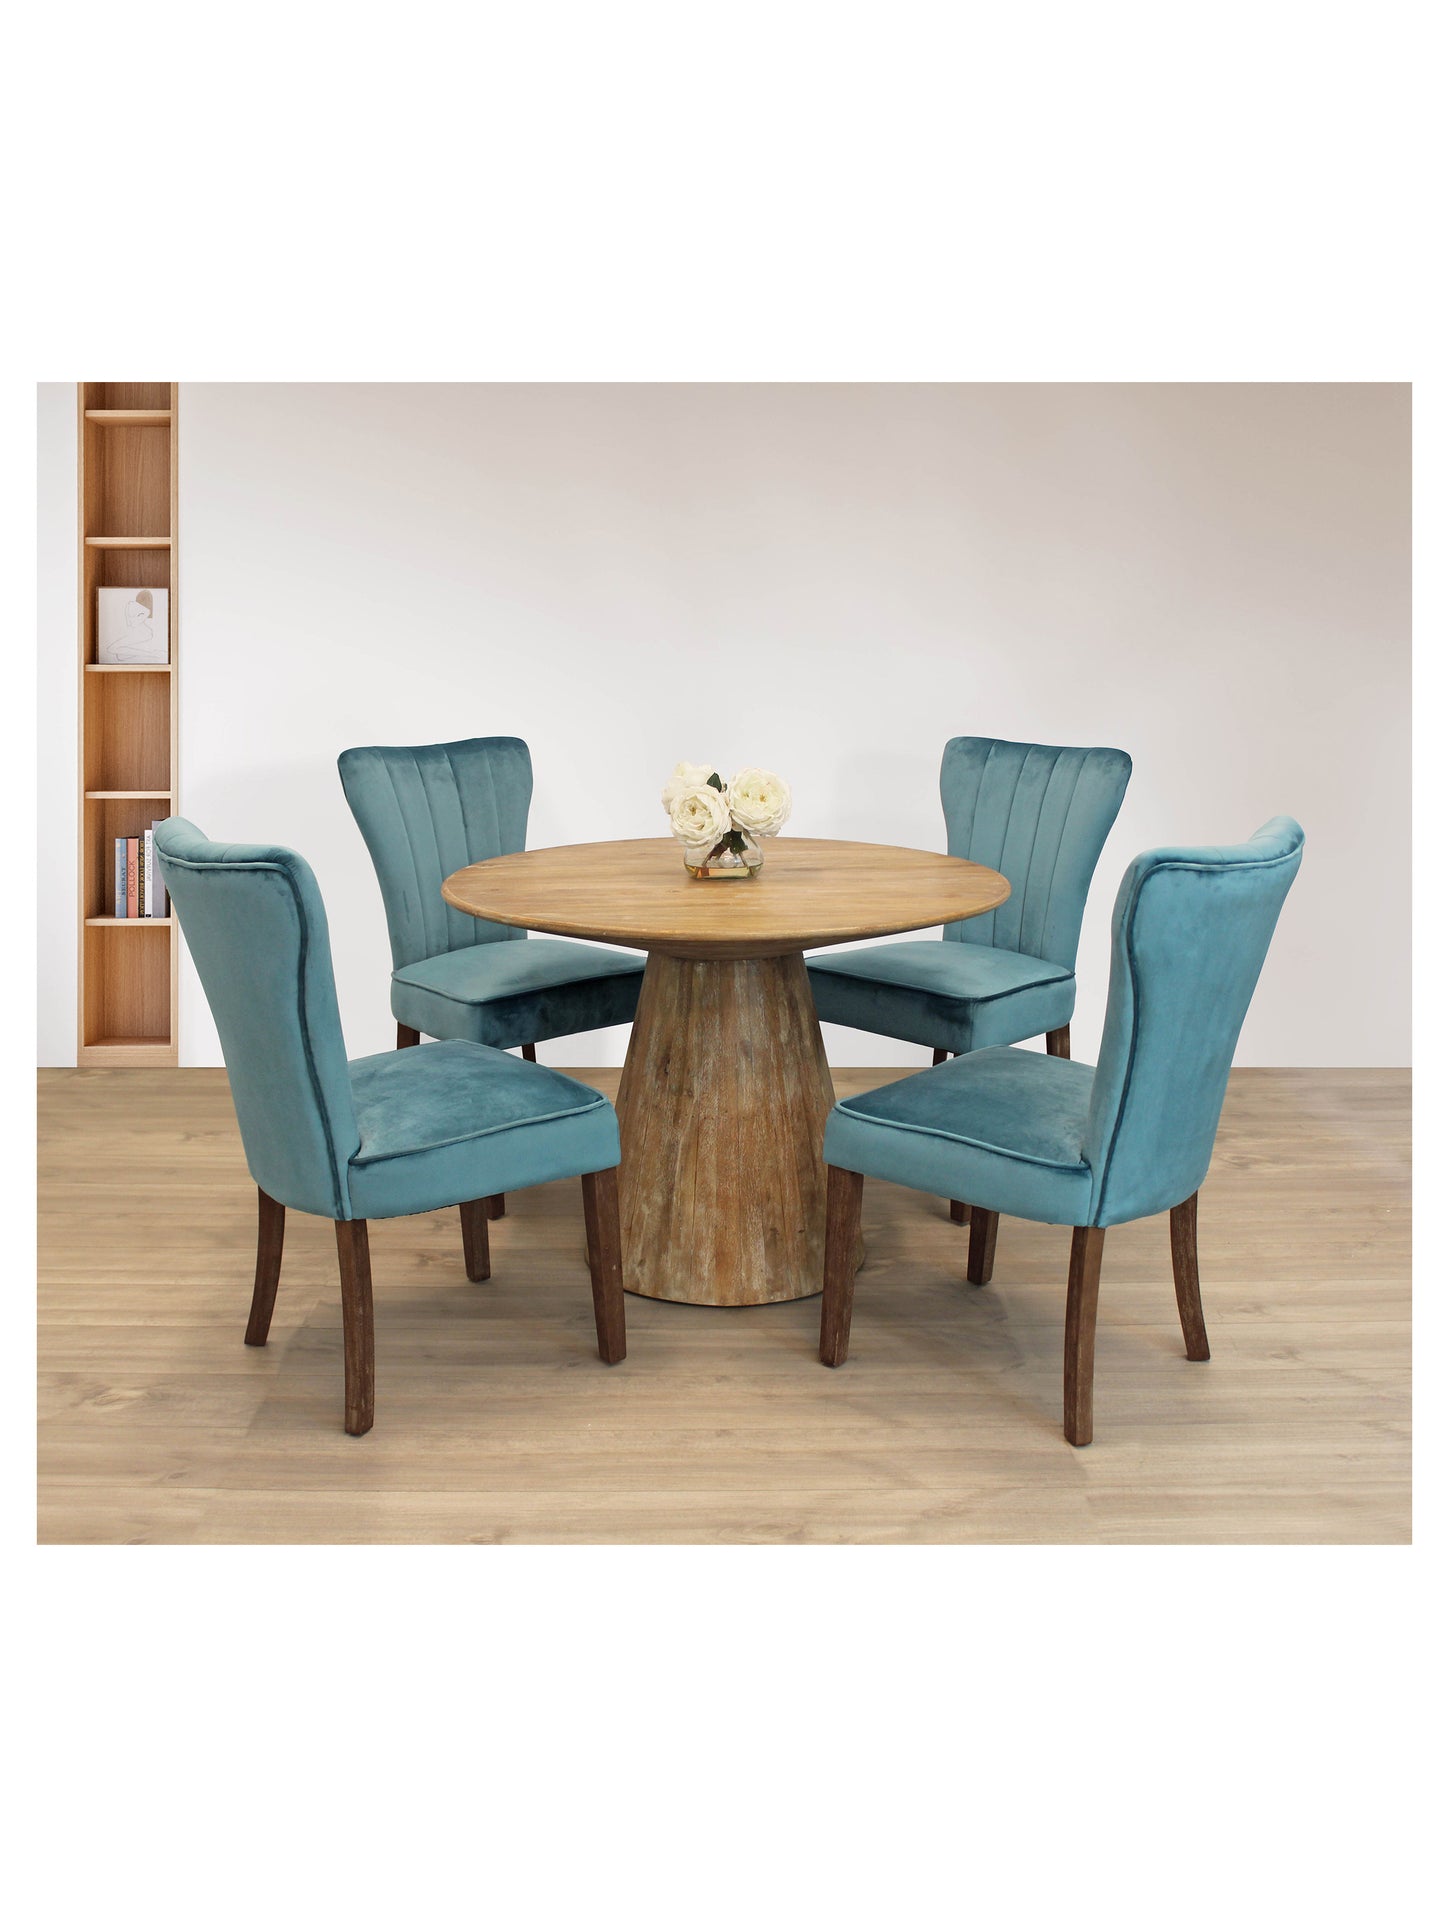 Eclectic Home Dining Table Jade 42 Wood Round